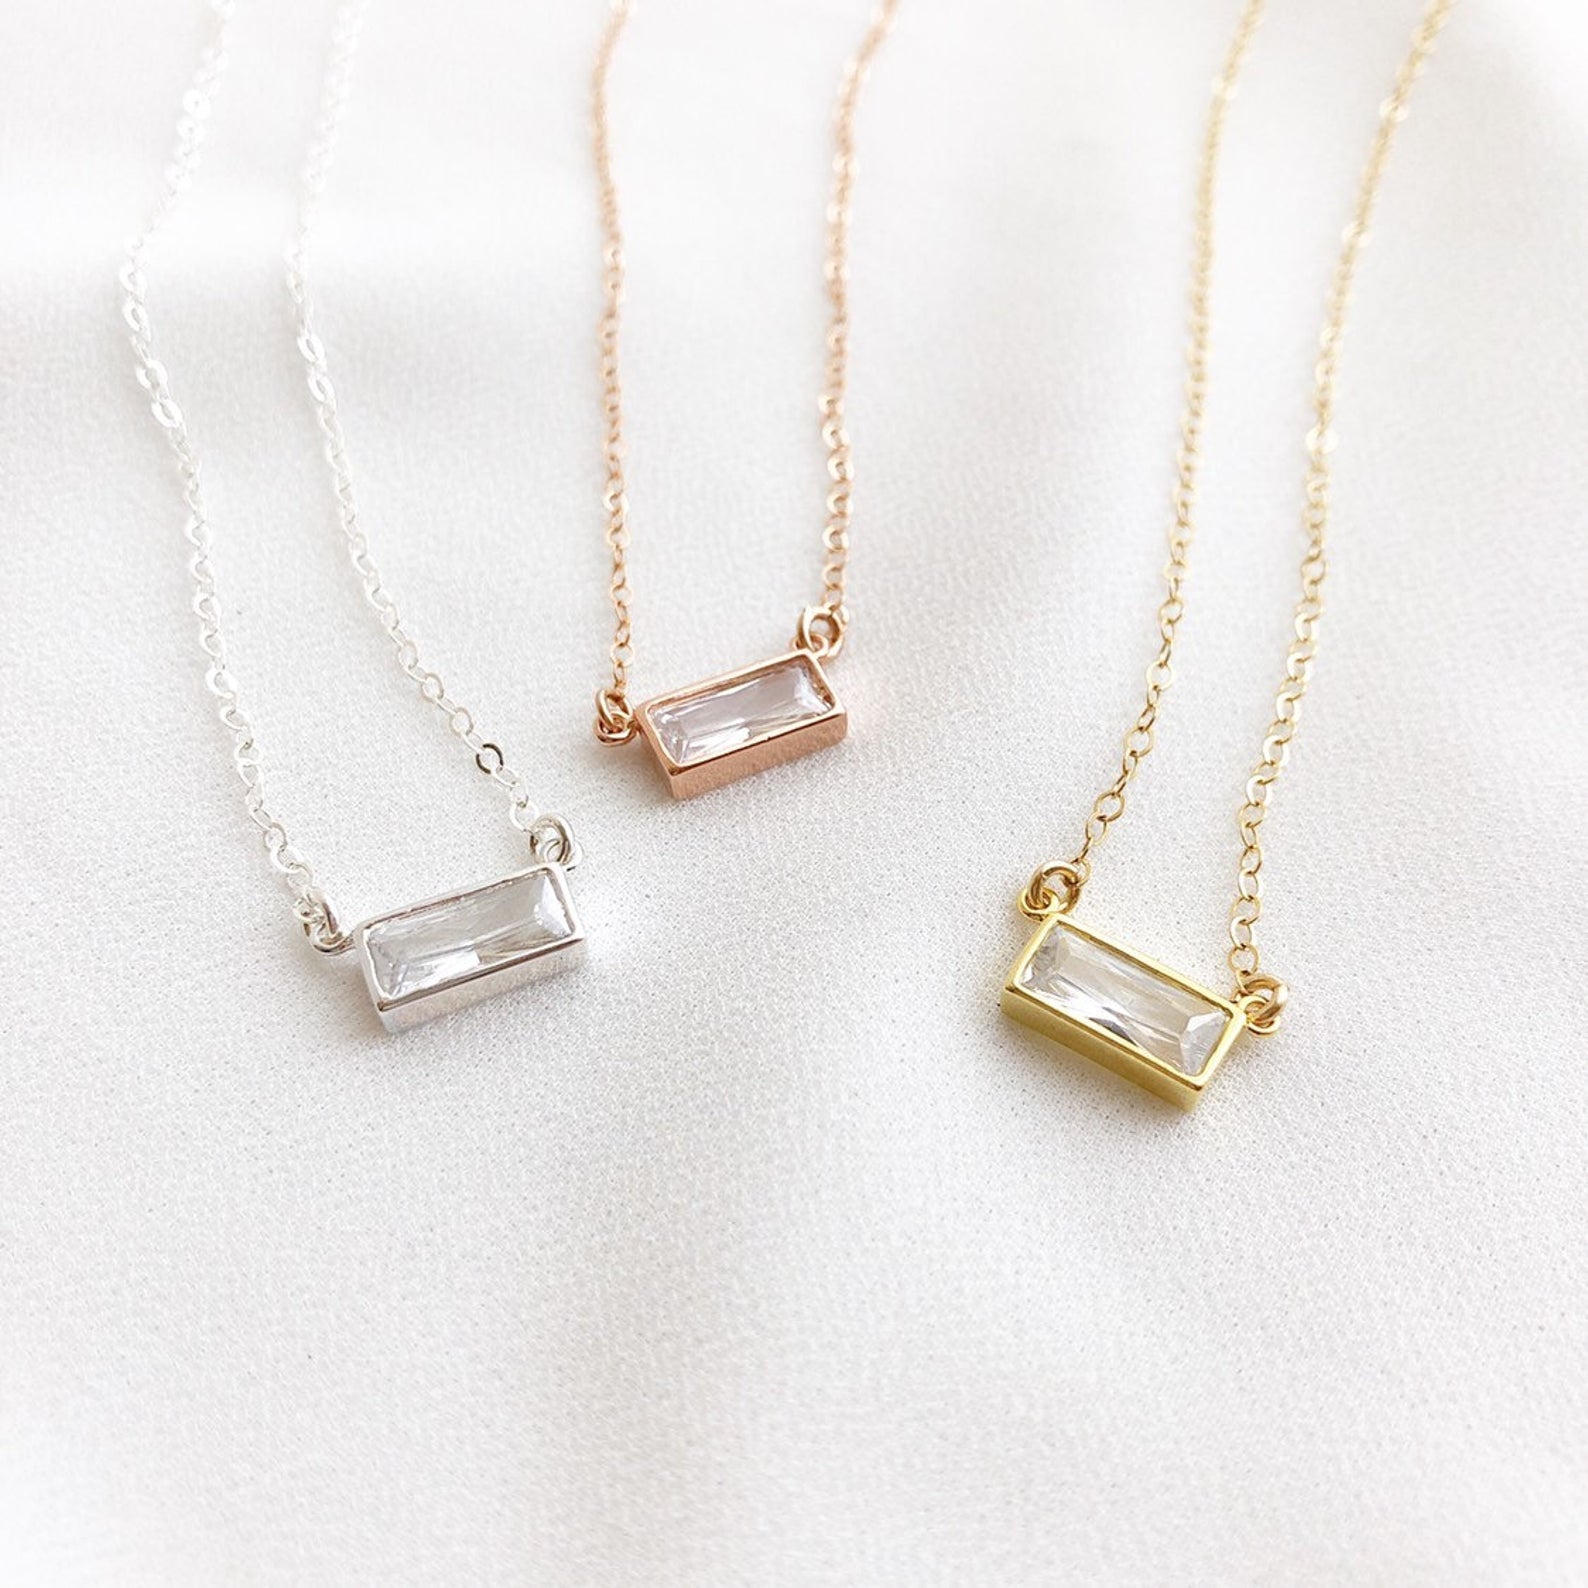 Emerald Cut Diamond Necklace, Gift for her, 16&quot;+ 1&quot; Extender, Baguette Diamond Necklace, Emerald Cut Diamond Necklace, Minimalist CZ Necklace, Emerald Cut Necklace, CZ Necklace, April Birthstone, Baguette Necklace